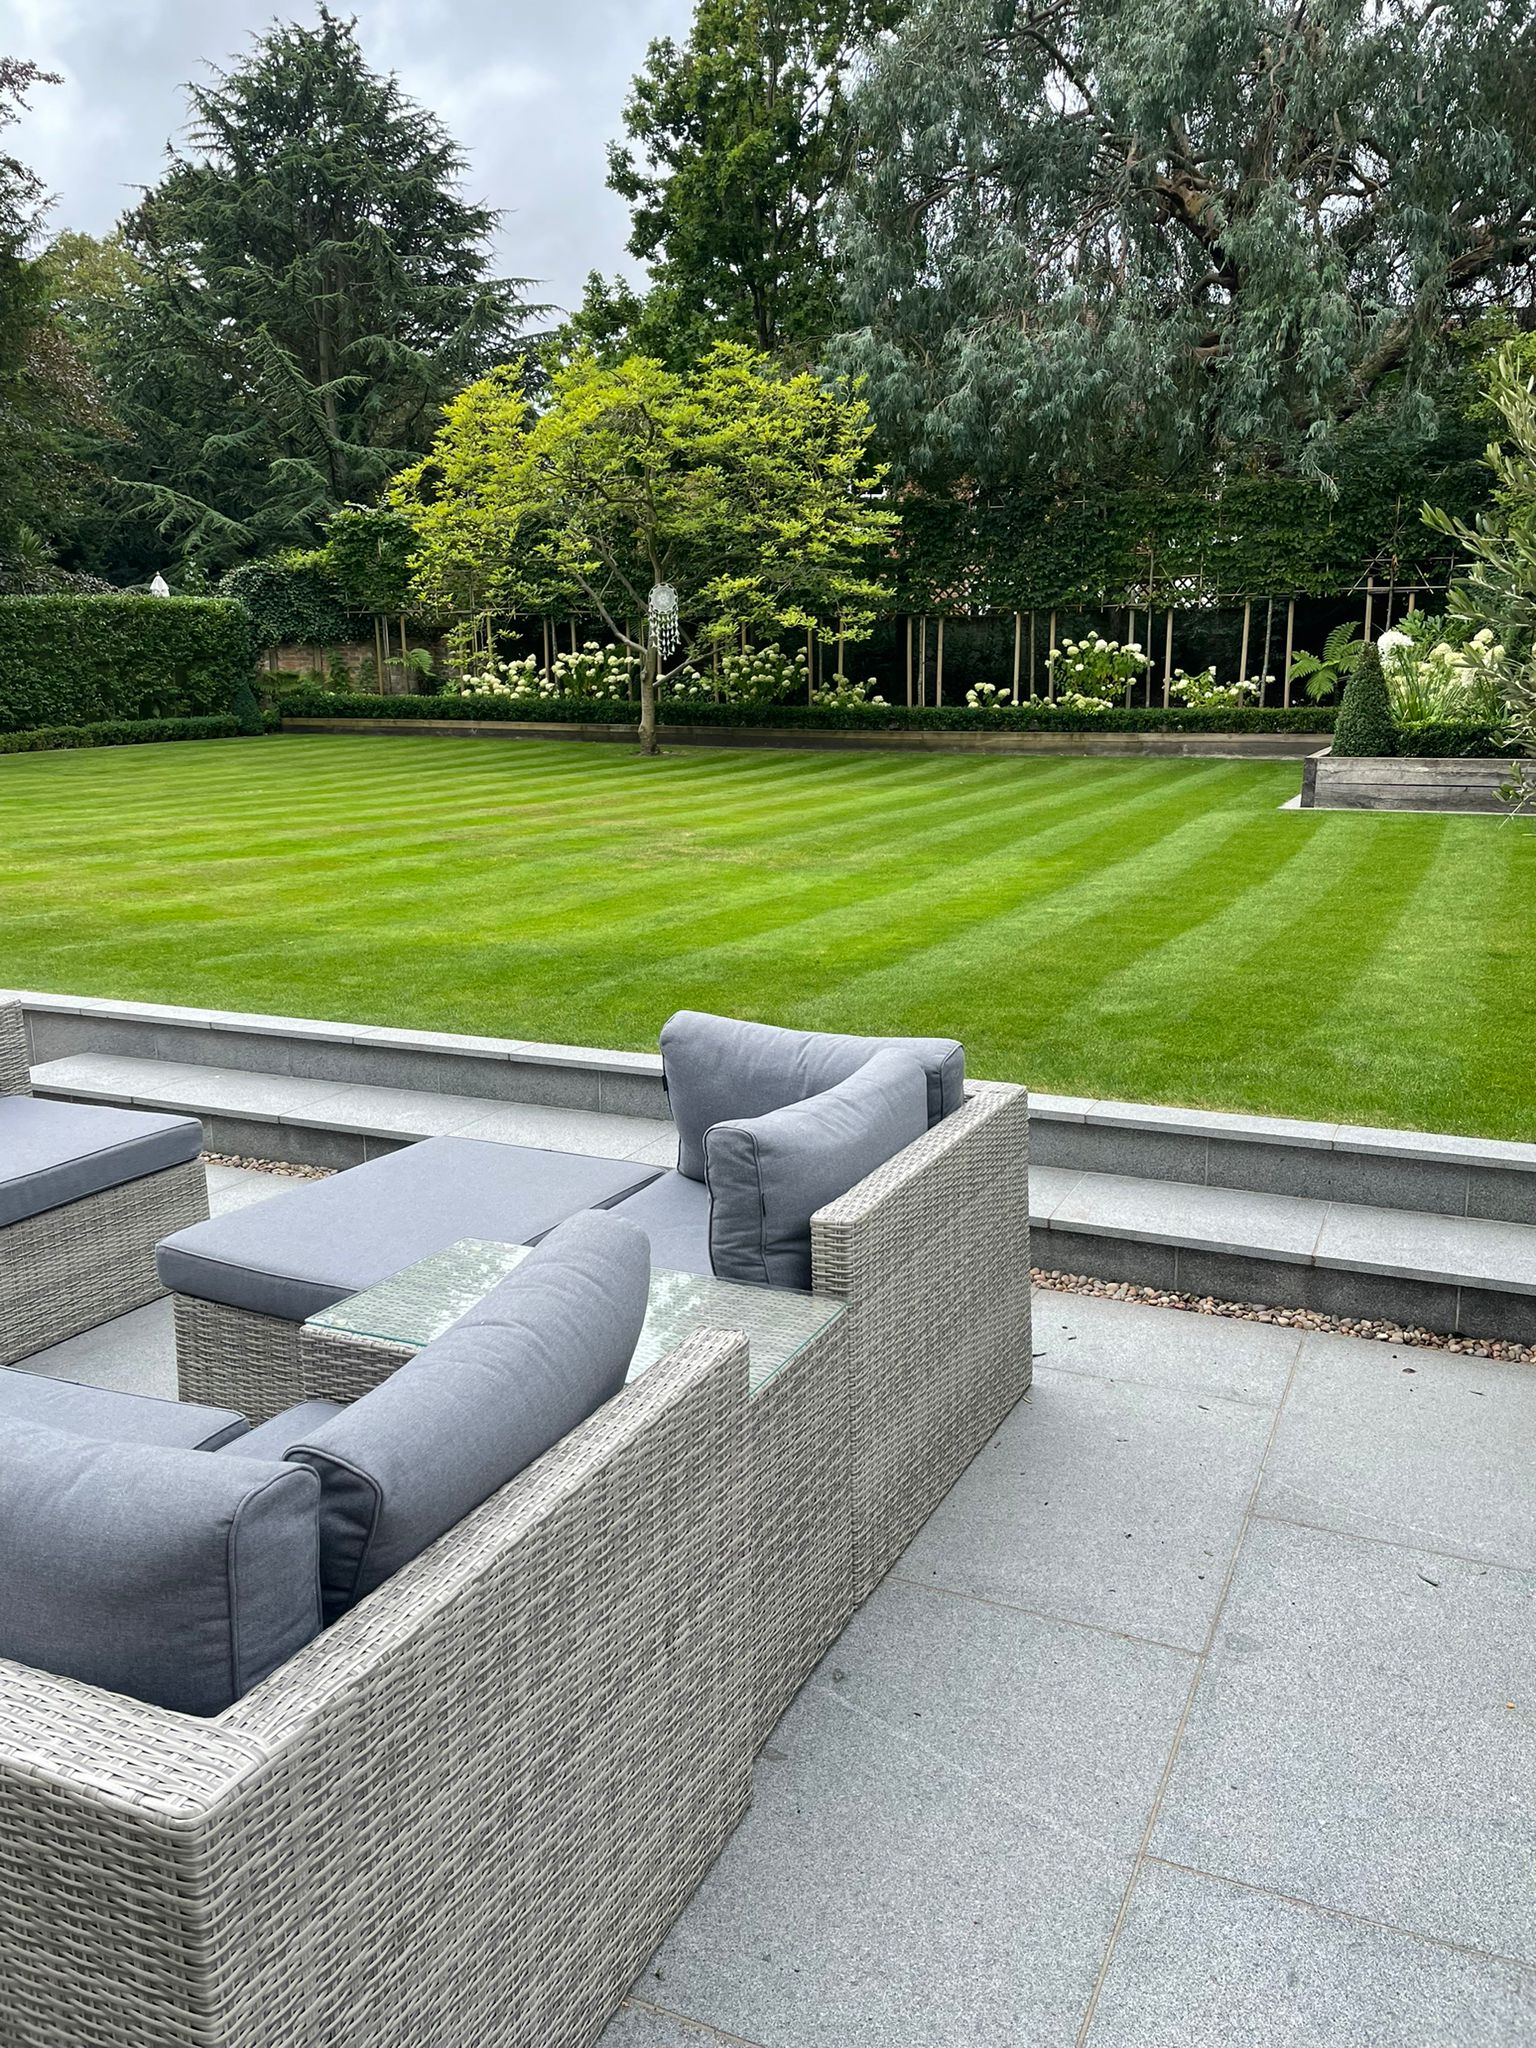 A tiled stone patio with a light-grey rattan garden furniture set with steps leading to a well-mowed garden lawn